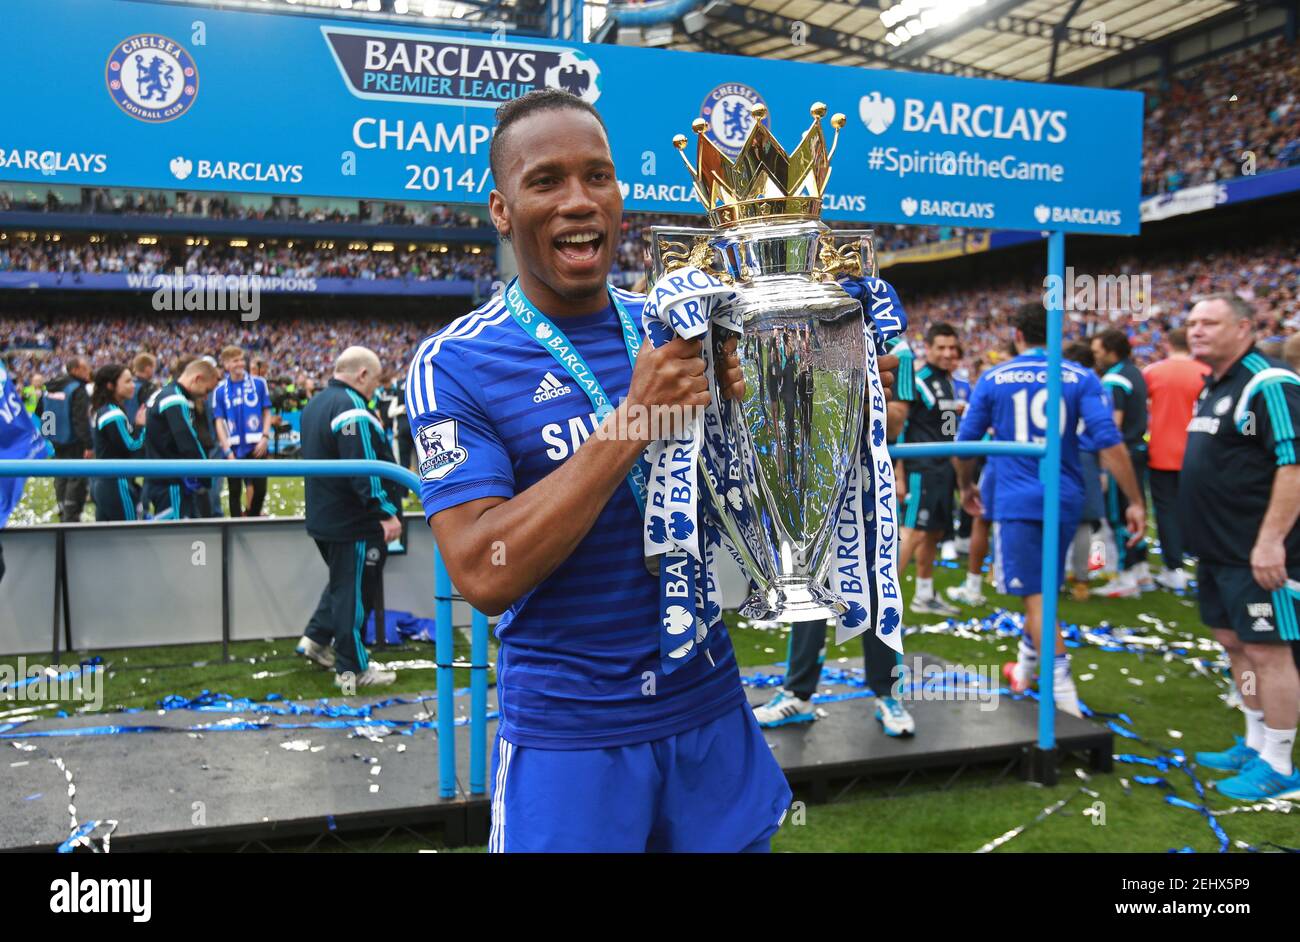 Football - Chelsea v Sunderland - Barclays Premier League - Stamford Bridge - 24/5/15 Chelsea's Didier Drogba celebrates with the trophy after winning the Barclays Premier League Action Images via Reuters / John Marsh Livepic EDITORIAL USE ONLY. No use with unauthorized audio, video, data, fixture lists, club/league logos or 'live' services. Online in-match use limited to 45 images, no video emulation. No use in betting, games or single club/league/player publications.  Please contact your account representative for further details. Stock Photo